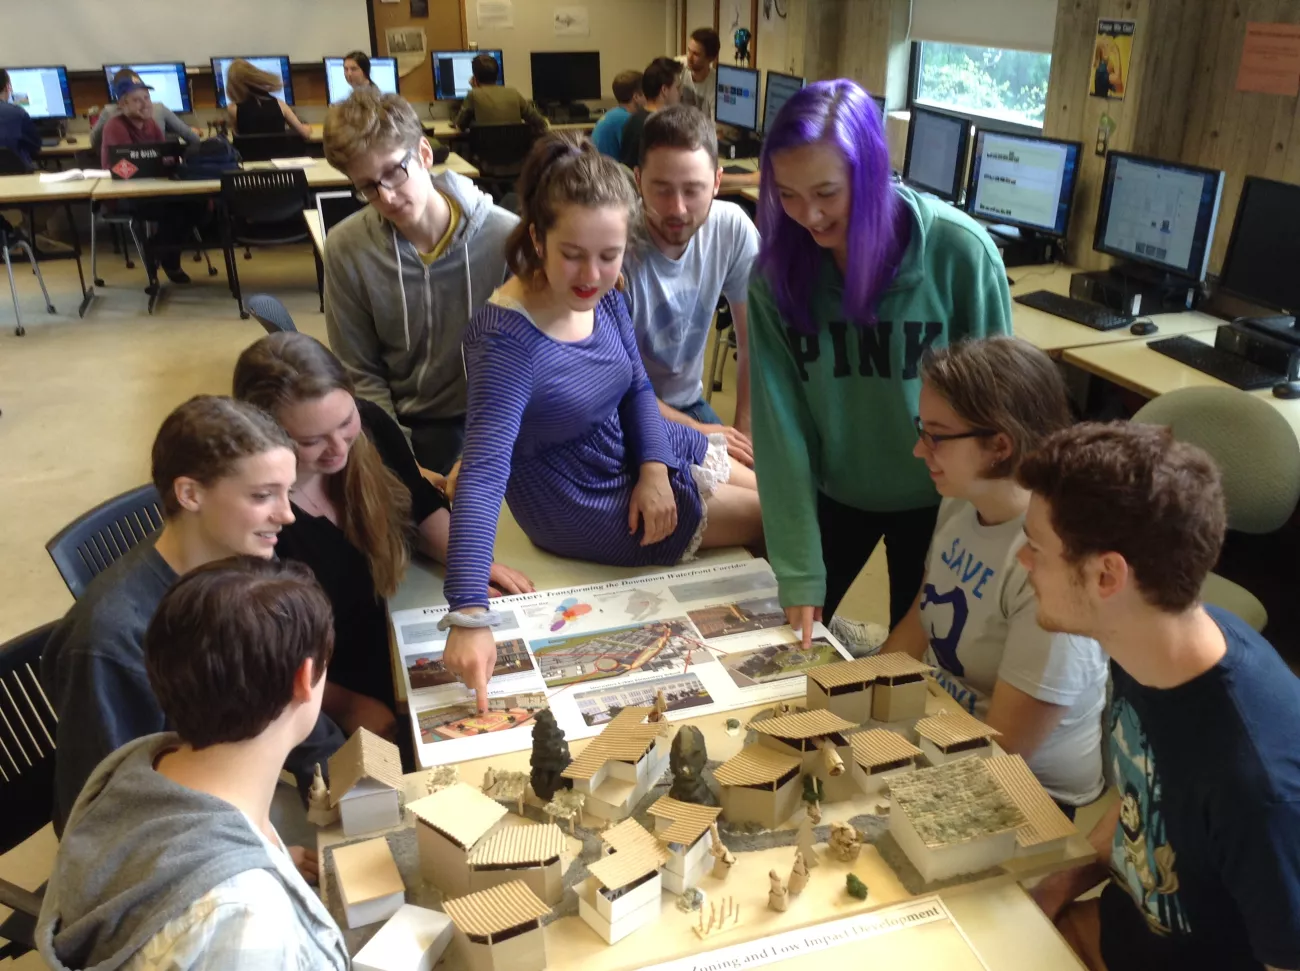 A group of students sitting and standing around a miniature model of a housing settlement.